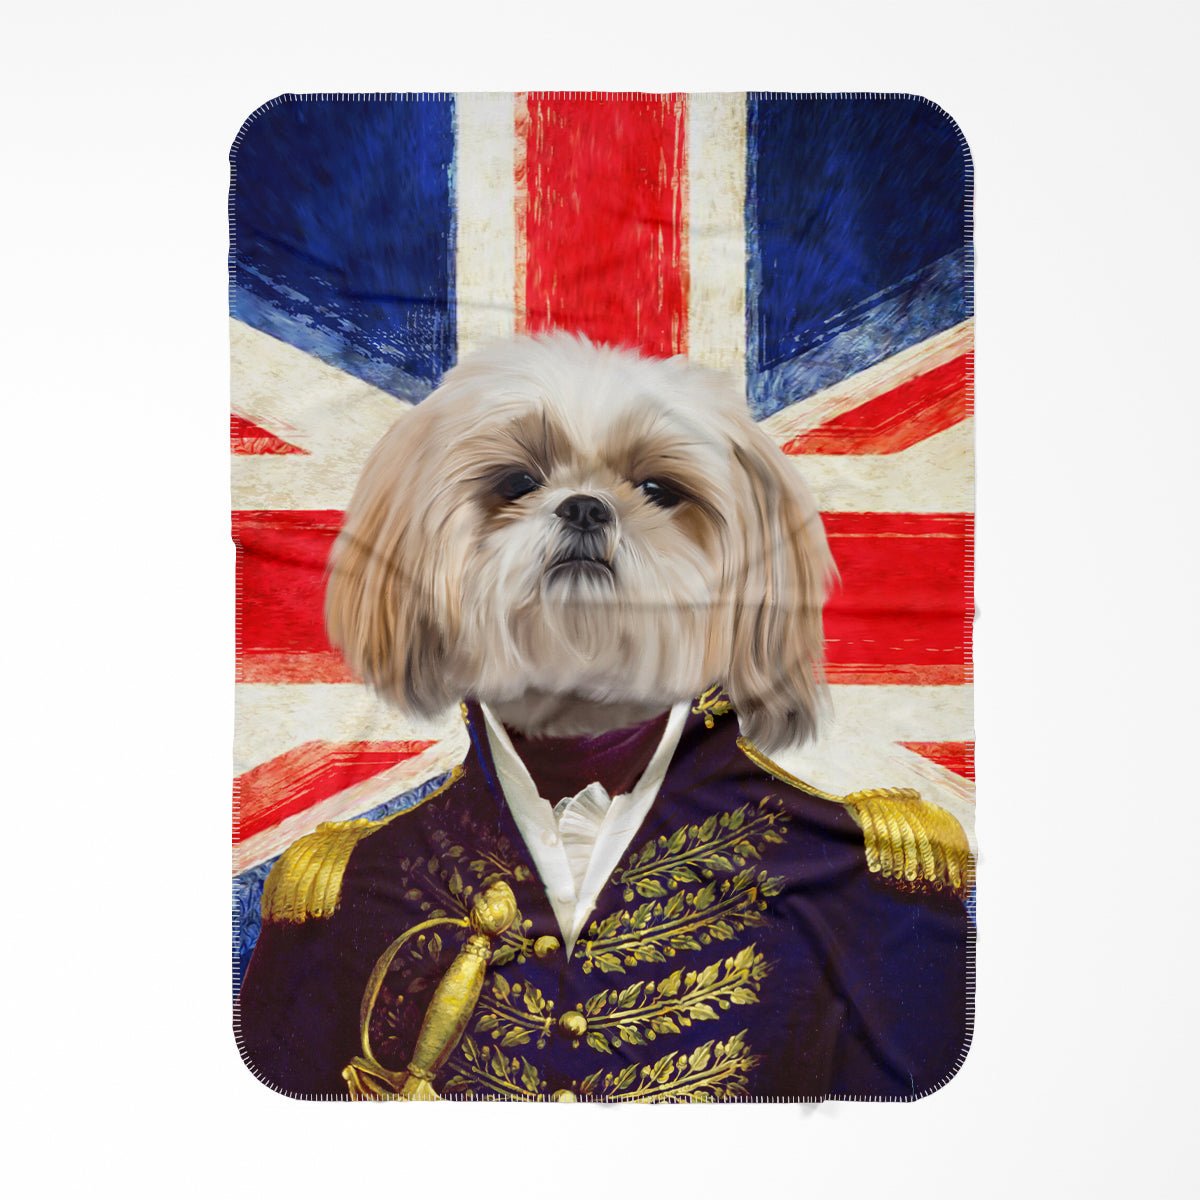 The General - British Flag Edtion: Custom Pet Blanket - Paw & Glory - #pet portraits# - #dog portraits# - #pet portraits uk#Paw and glory, Pet portraits blanket,pet photo blanket throw, christmas dog blankets, blanket pets, blanket with pets face, cat picture on blanket